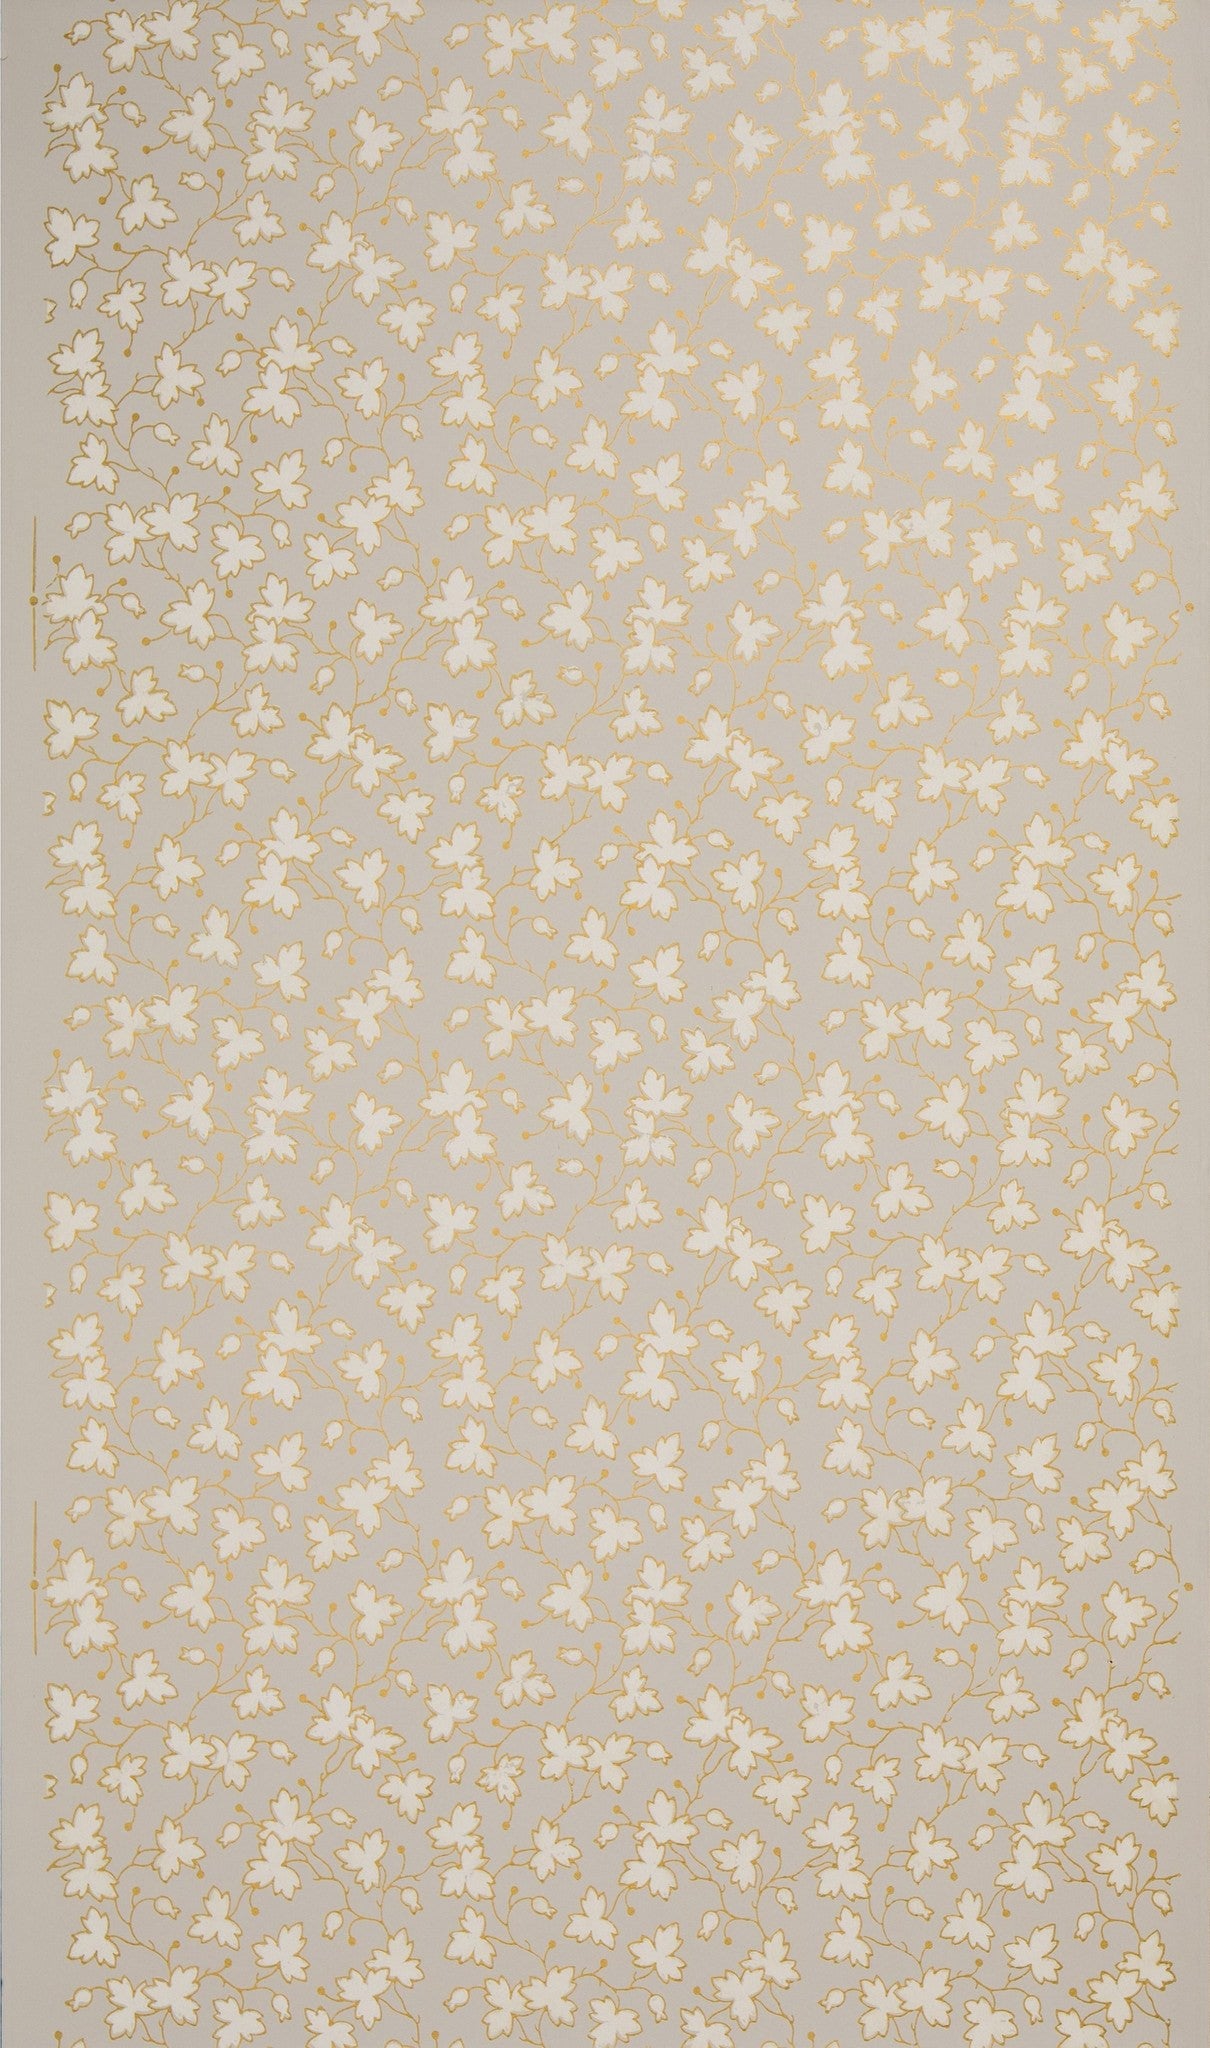 Small White Leaves with Gold Outlines - Antique Wallpaper Remnant